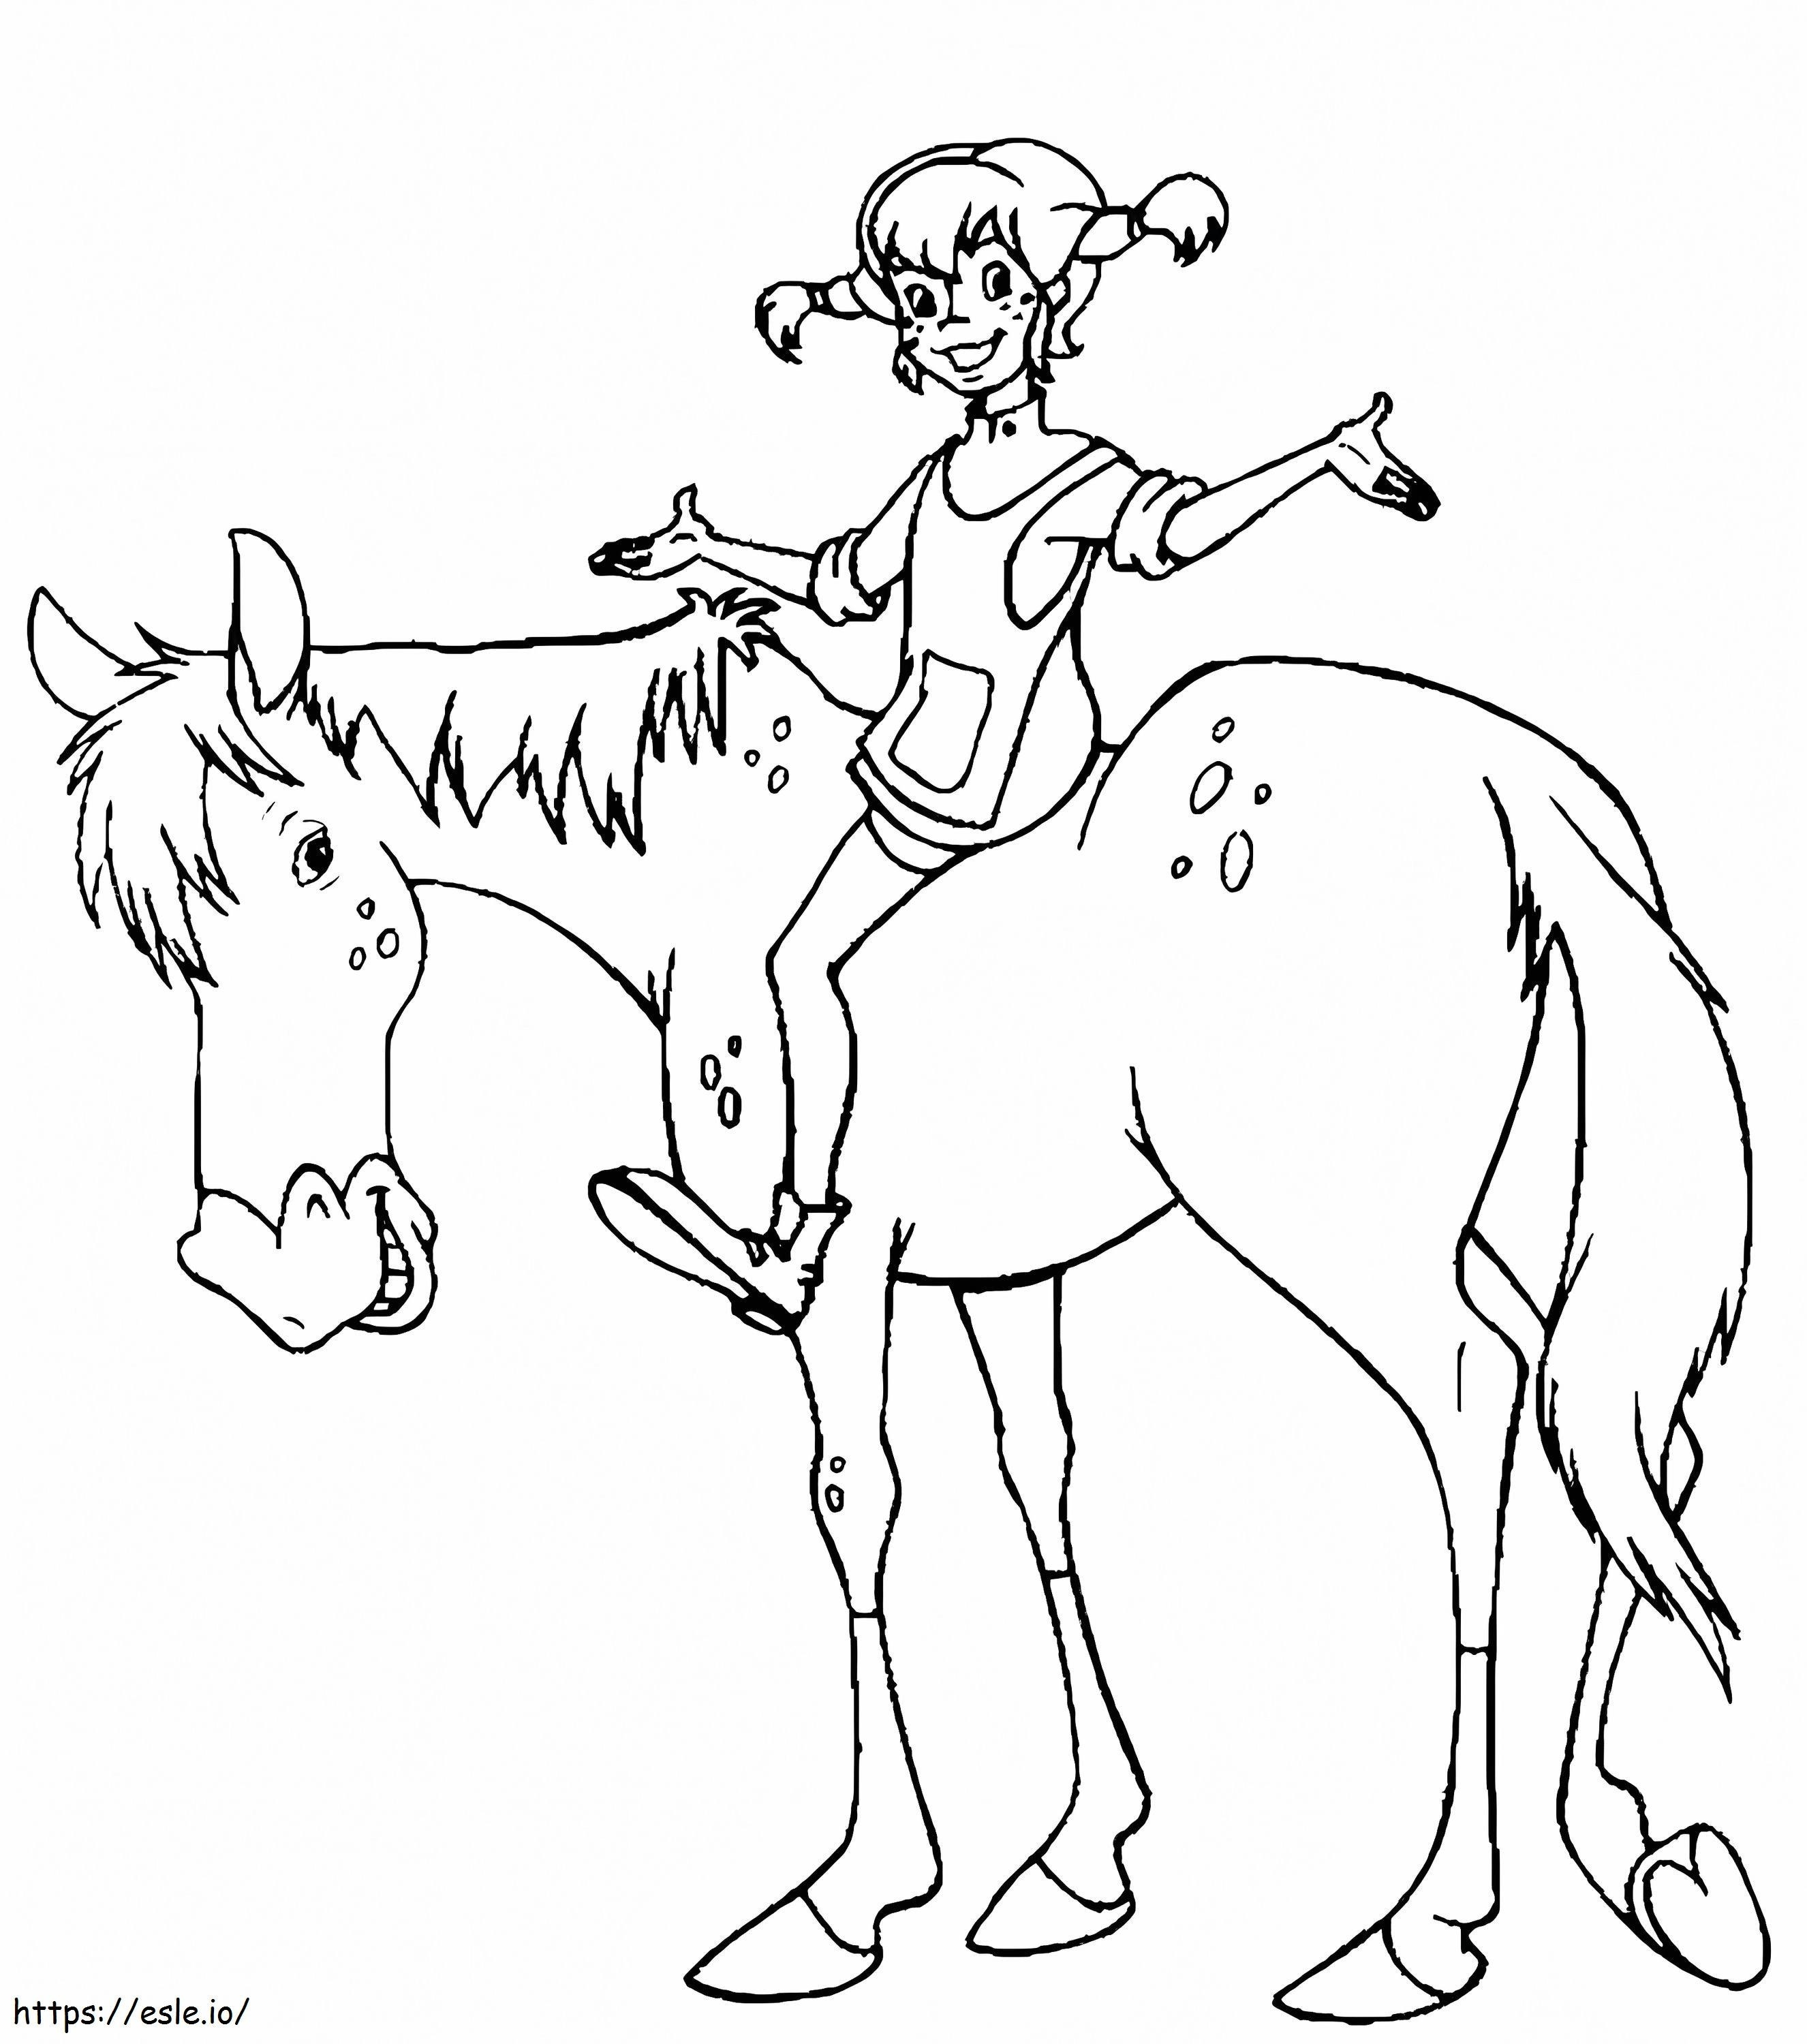 Pippi Longstocking To Print coloring page